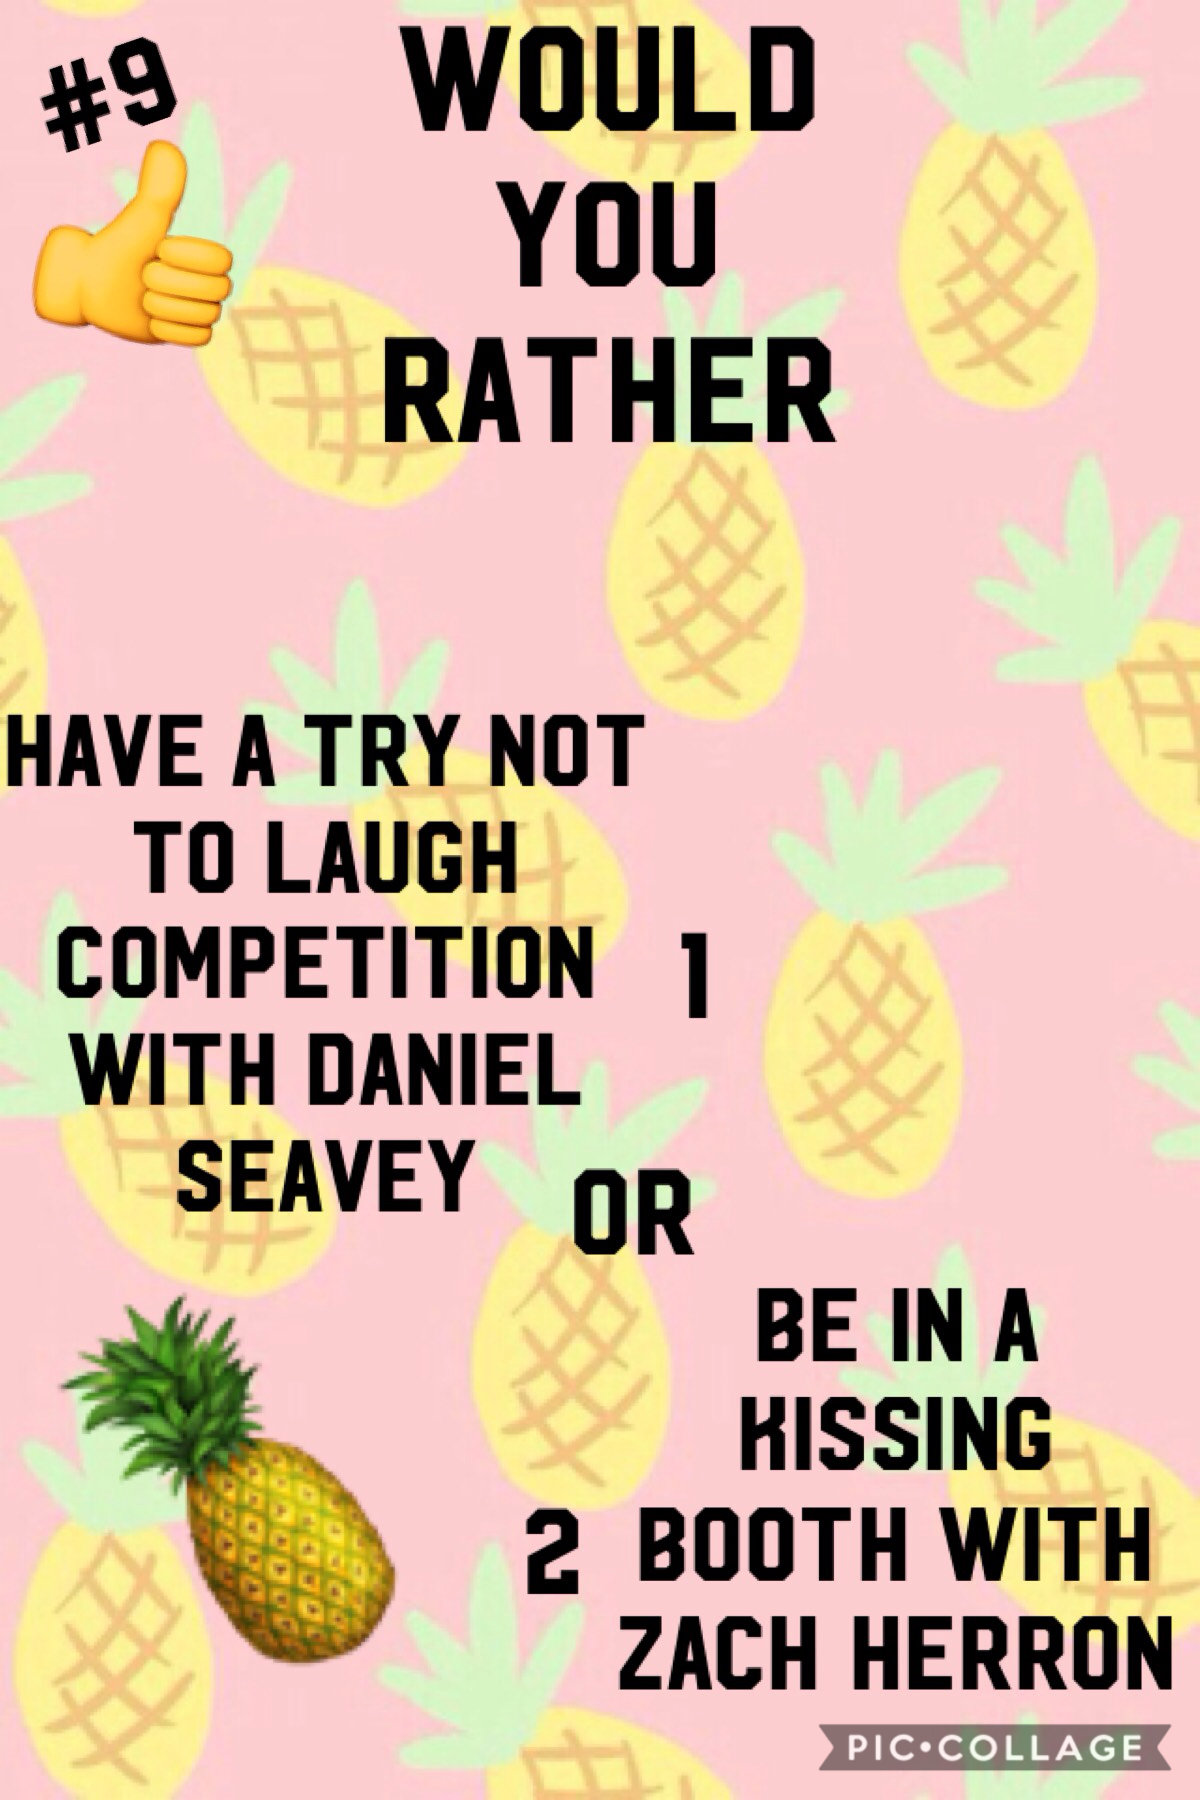 🍍Tap🍍

My opinion would be 10000000000000000% be #1. 
I LOVE Daniel Seavey ❤️❤️❤️❤️❤️